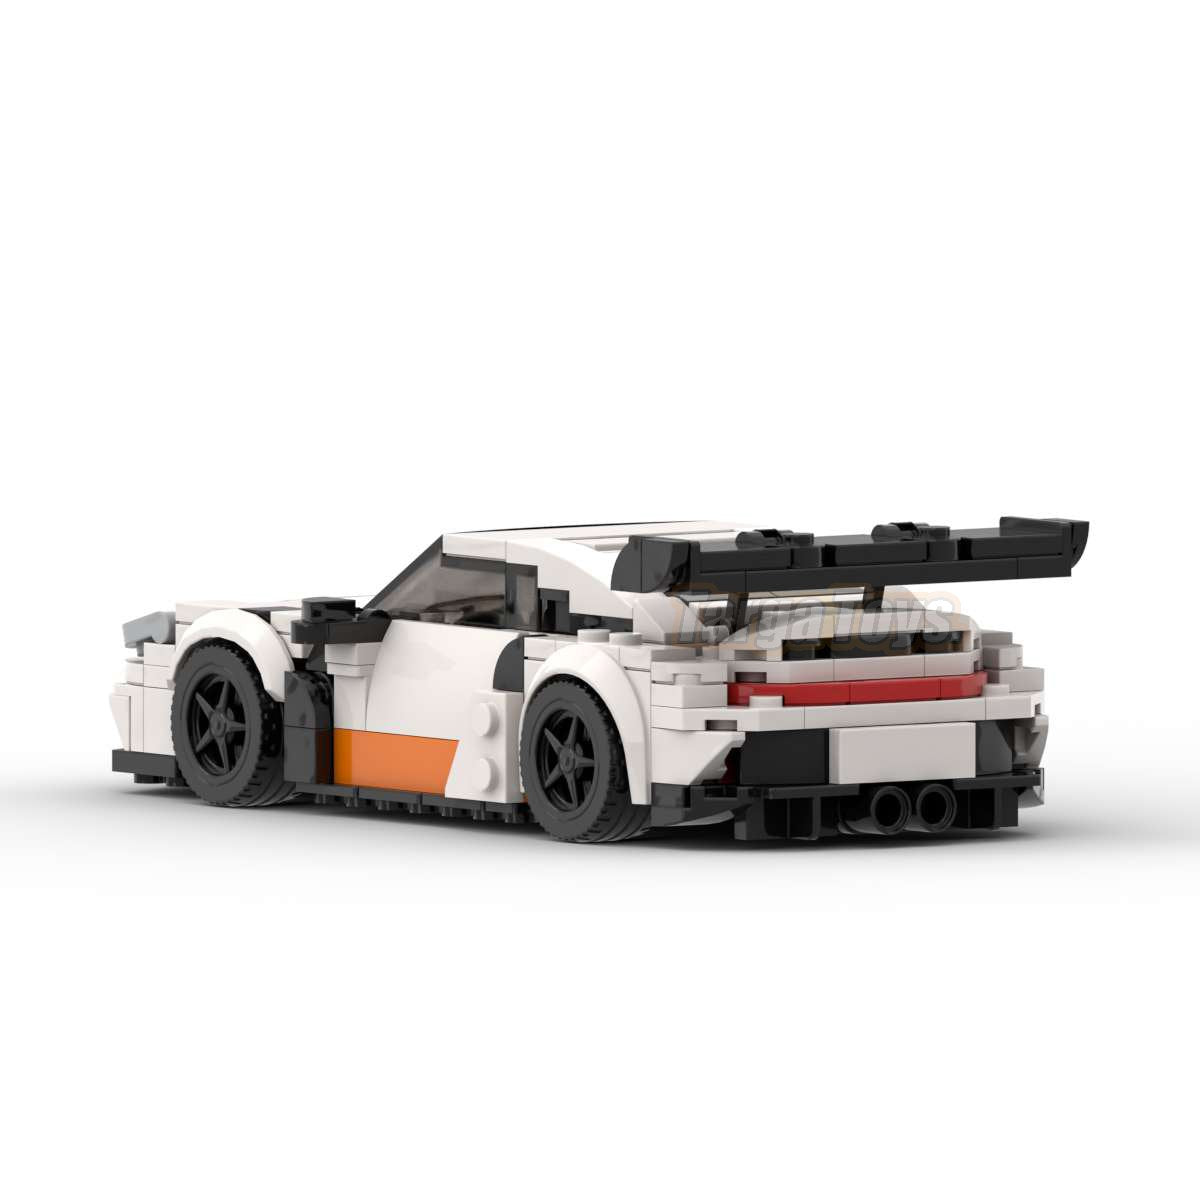 Porsche 911 992 GT3RS made from lego building blocks